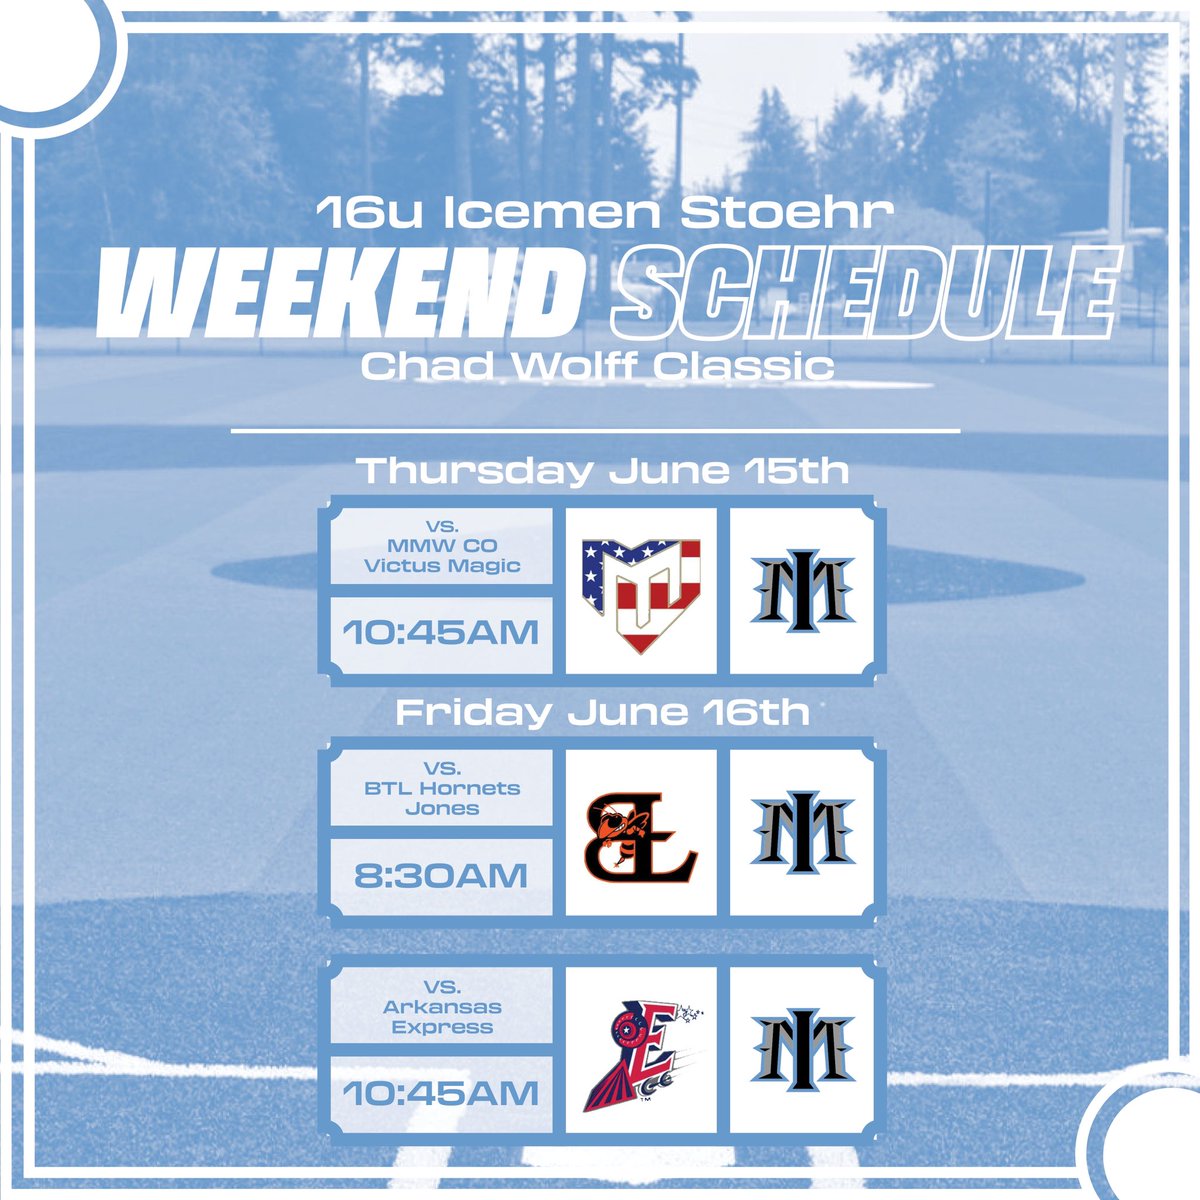 Our 2023 summer season kicks off this weekend with our teams traveling down to Arkansas for the Chad Wolff Classic. Our 14u Semans team is also headed down to Iowa this weekend.

#icemenexperience #iceicebaby #summerbaseball